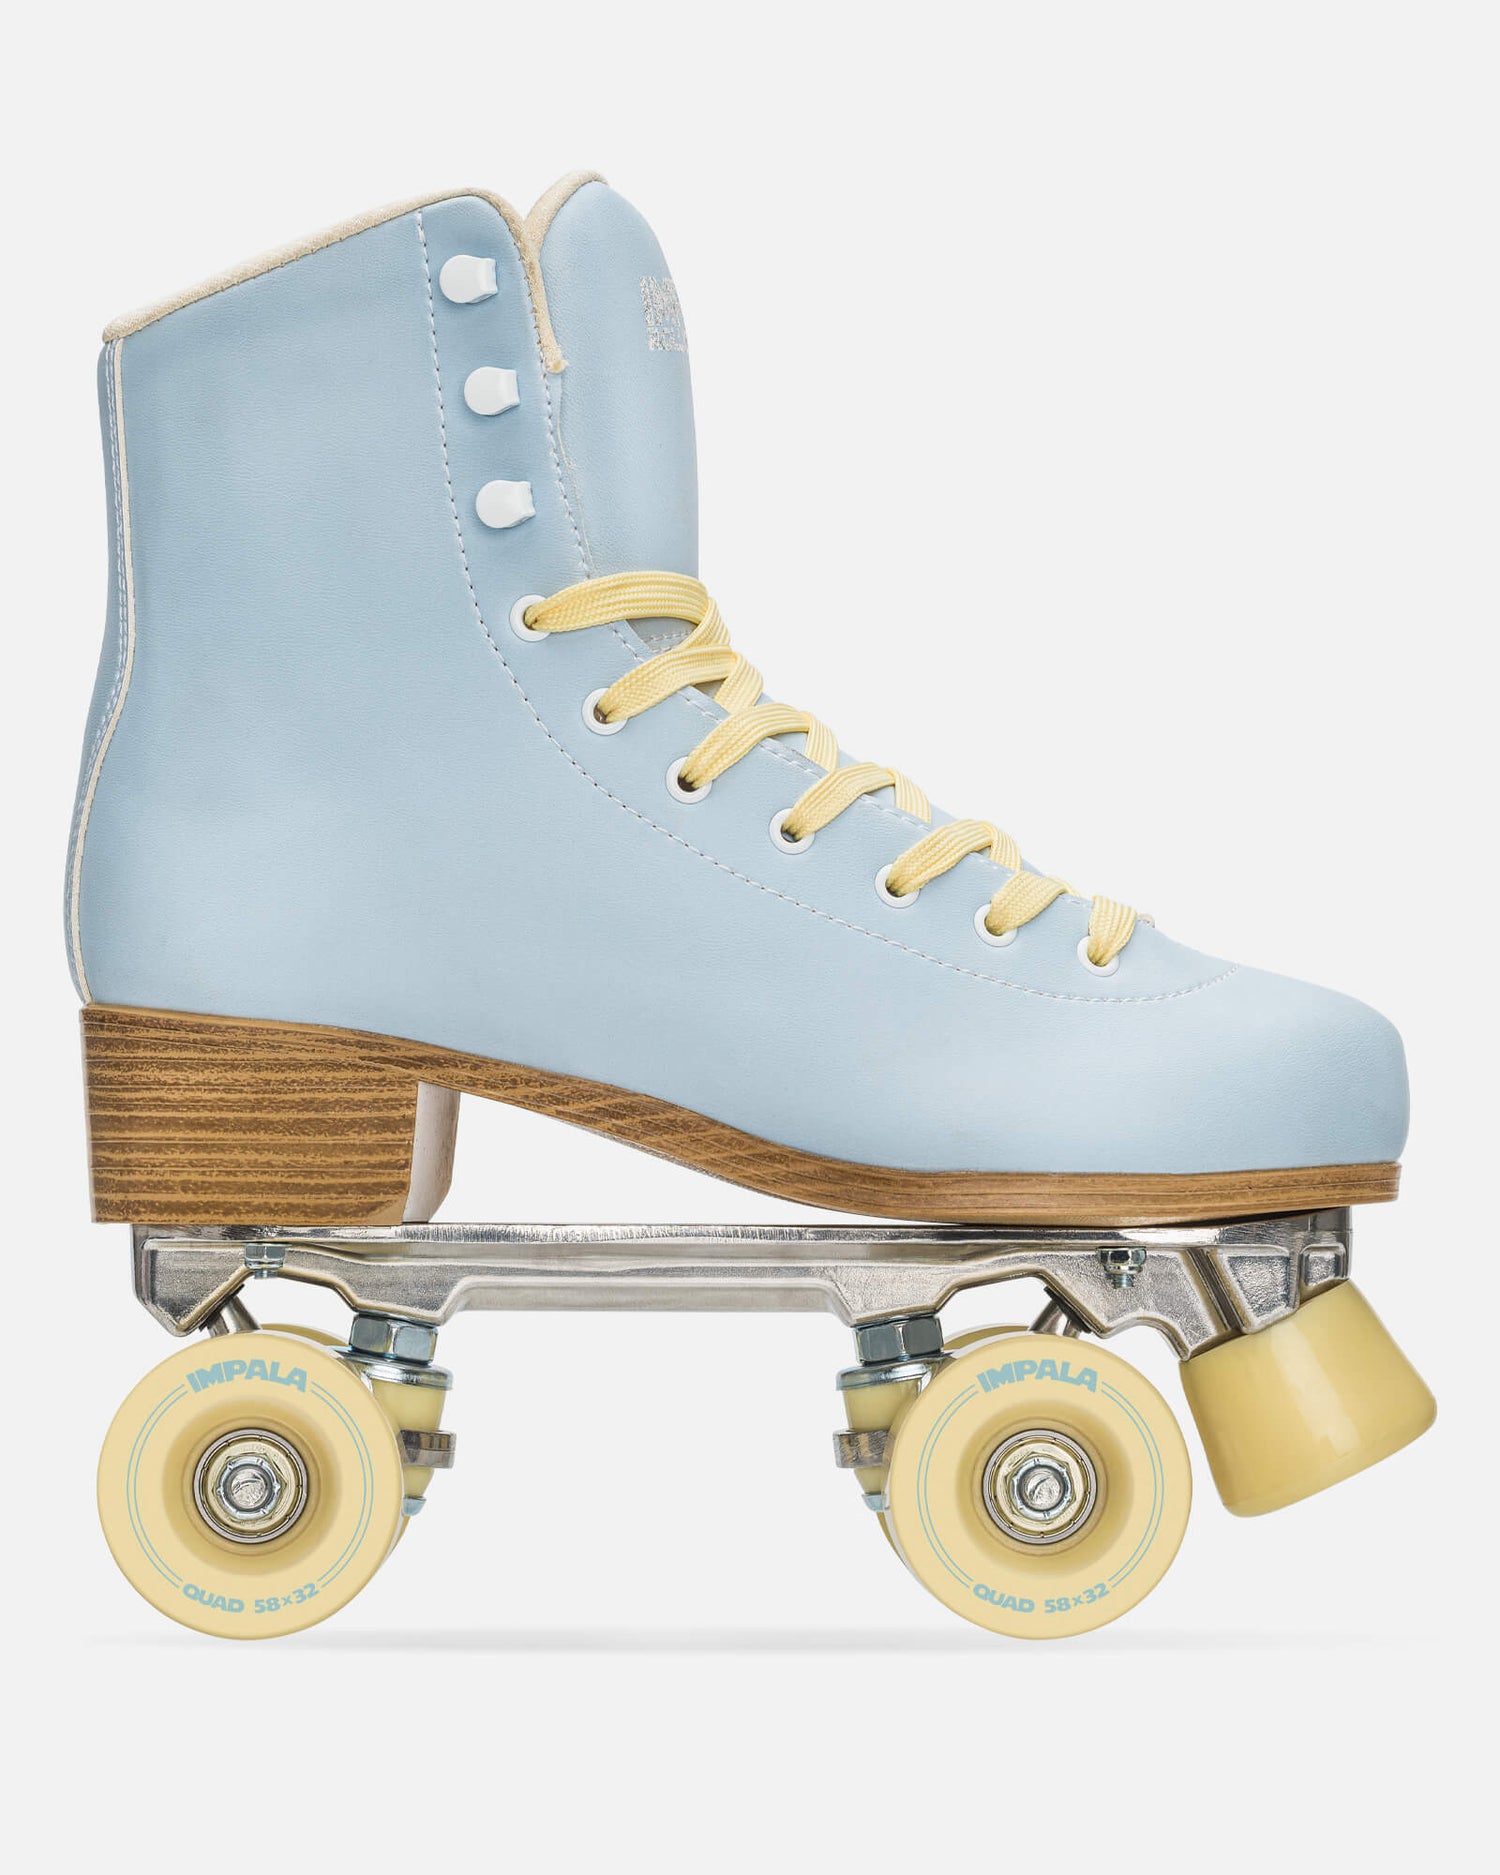 Flamingueo Rollers Patins 4 Roues Design Holographique Roller